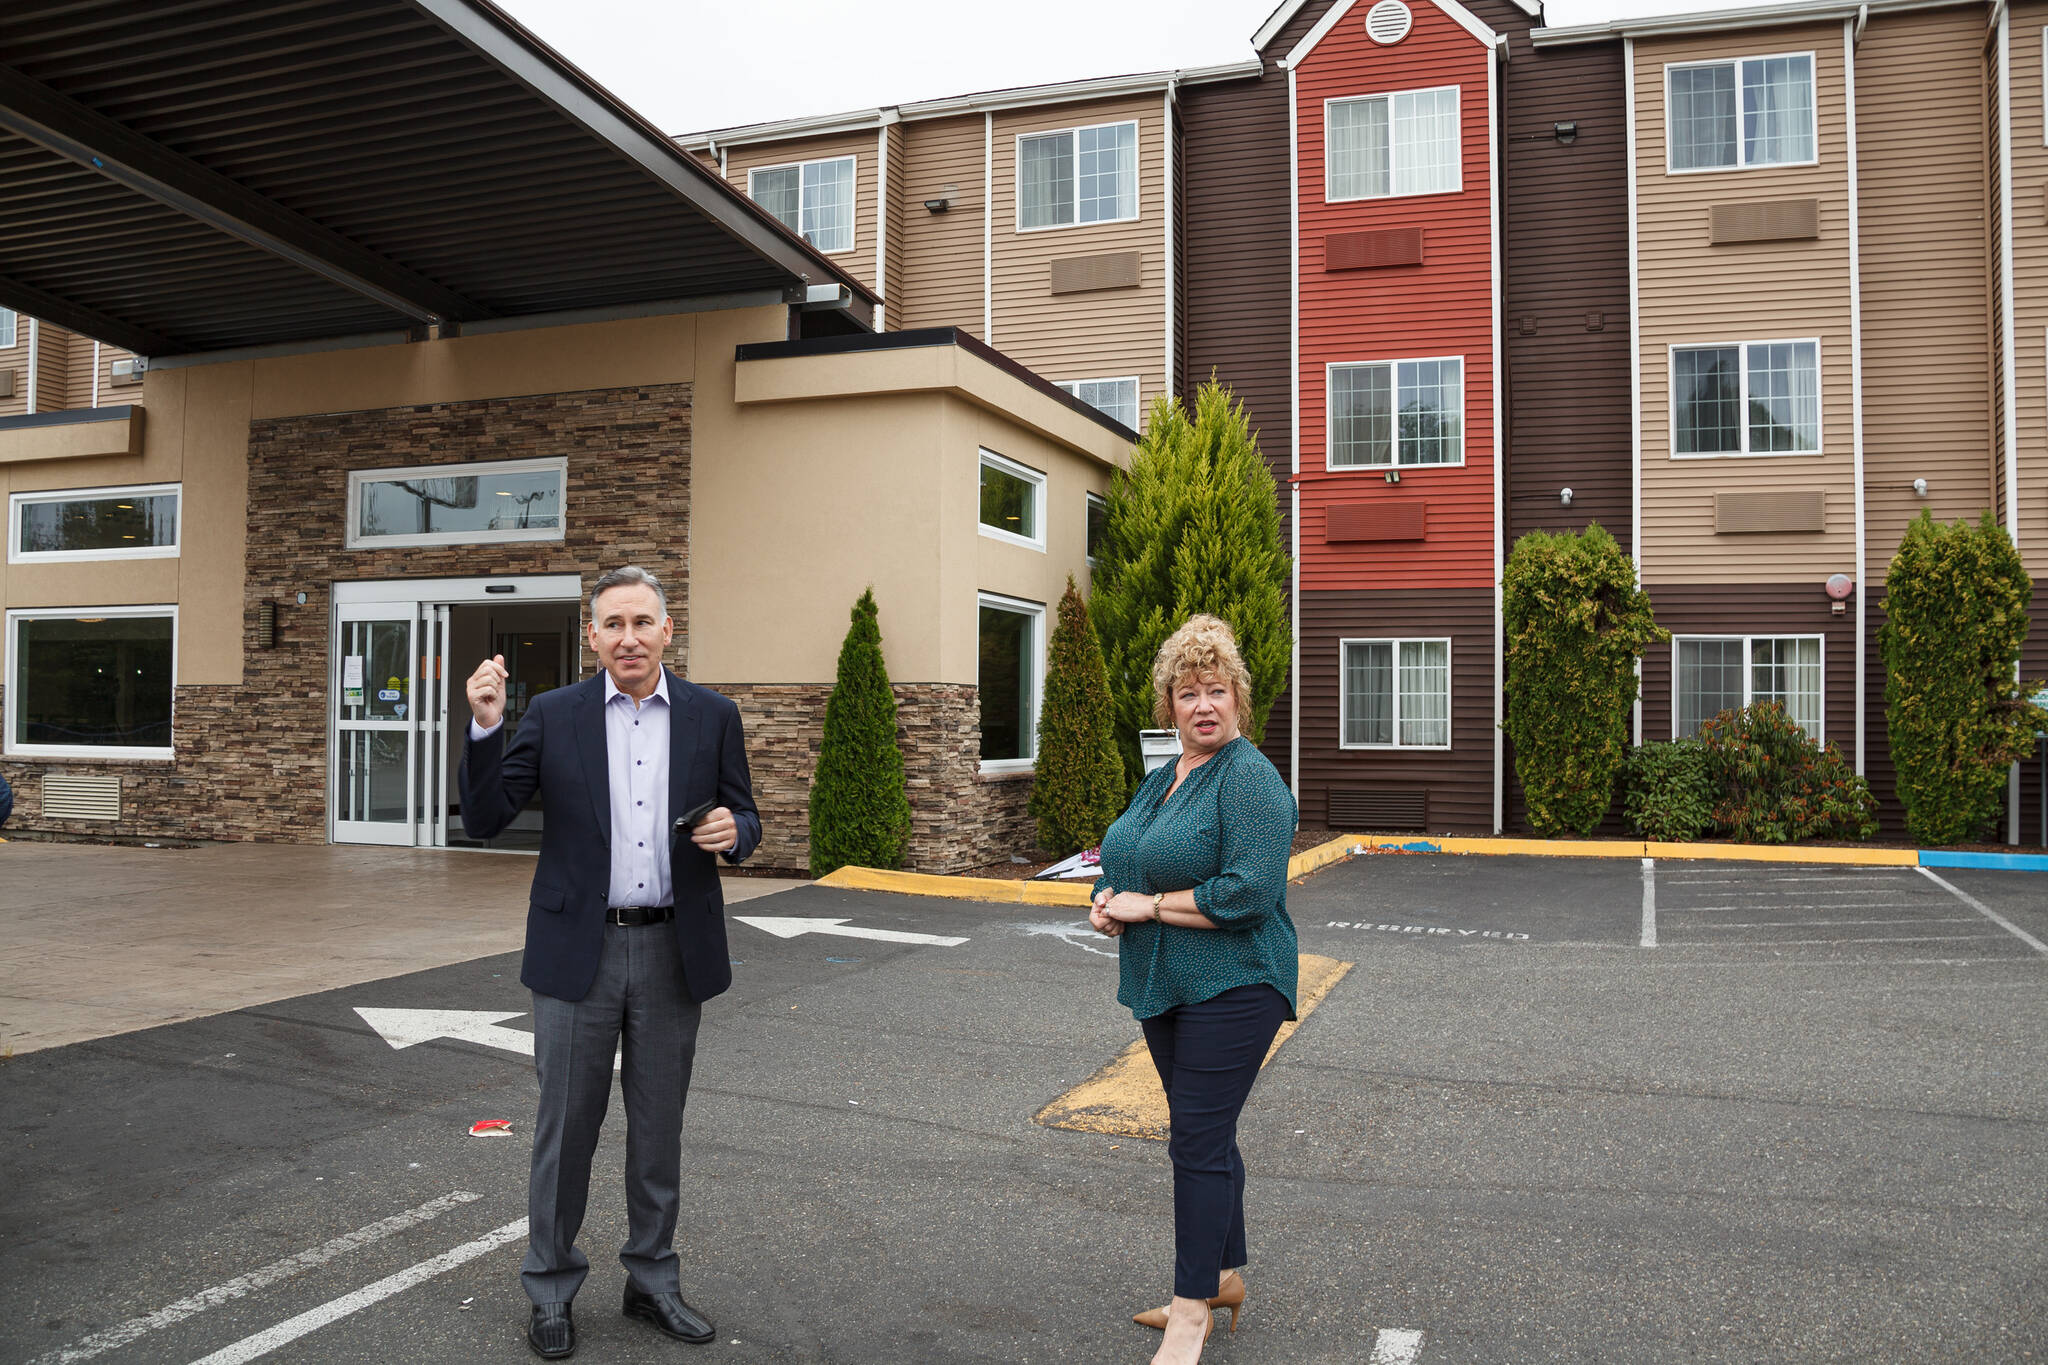 King County Executive Dow Constantine and Auburn Mayor Nancy Backus stand in front of the Clarion Hotel in Auburn on July 20, 2021. The hotel will be used to house approximately 100 people experiencing homelessness in the area as part of the county's Health Through Housing program. Photo by Henry Stewart-Wood/Auburn Reporter